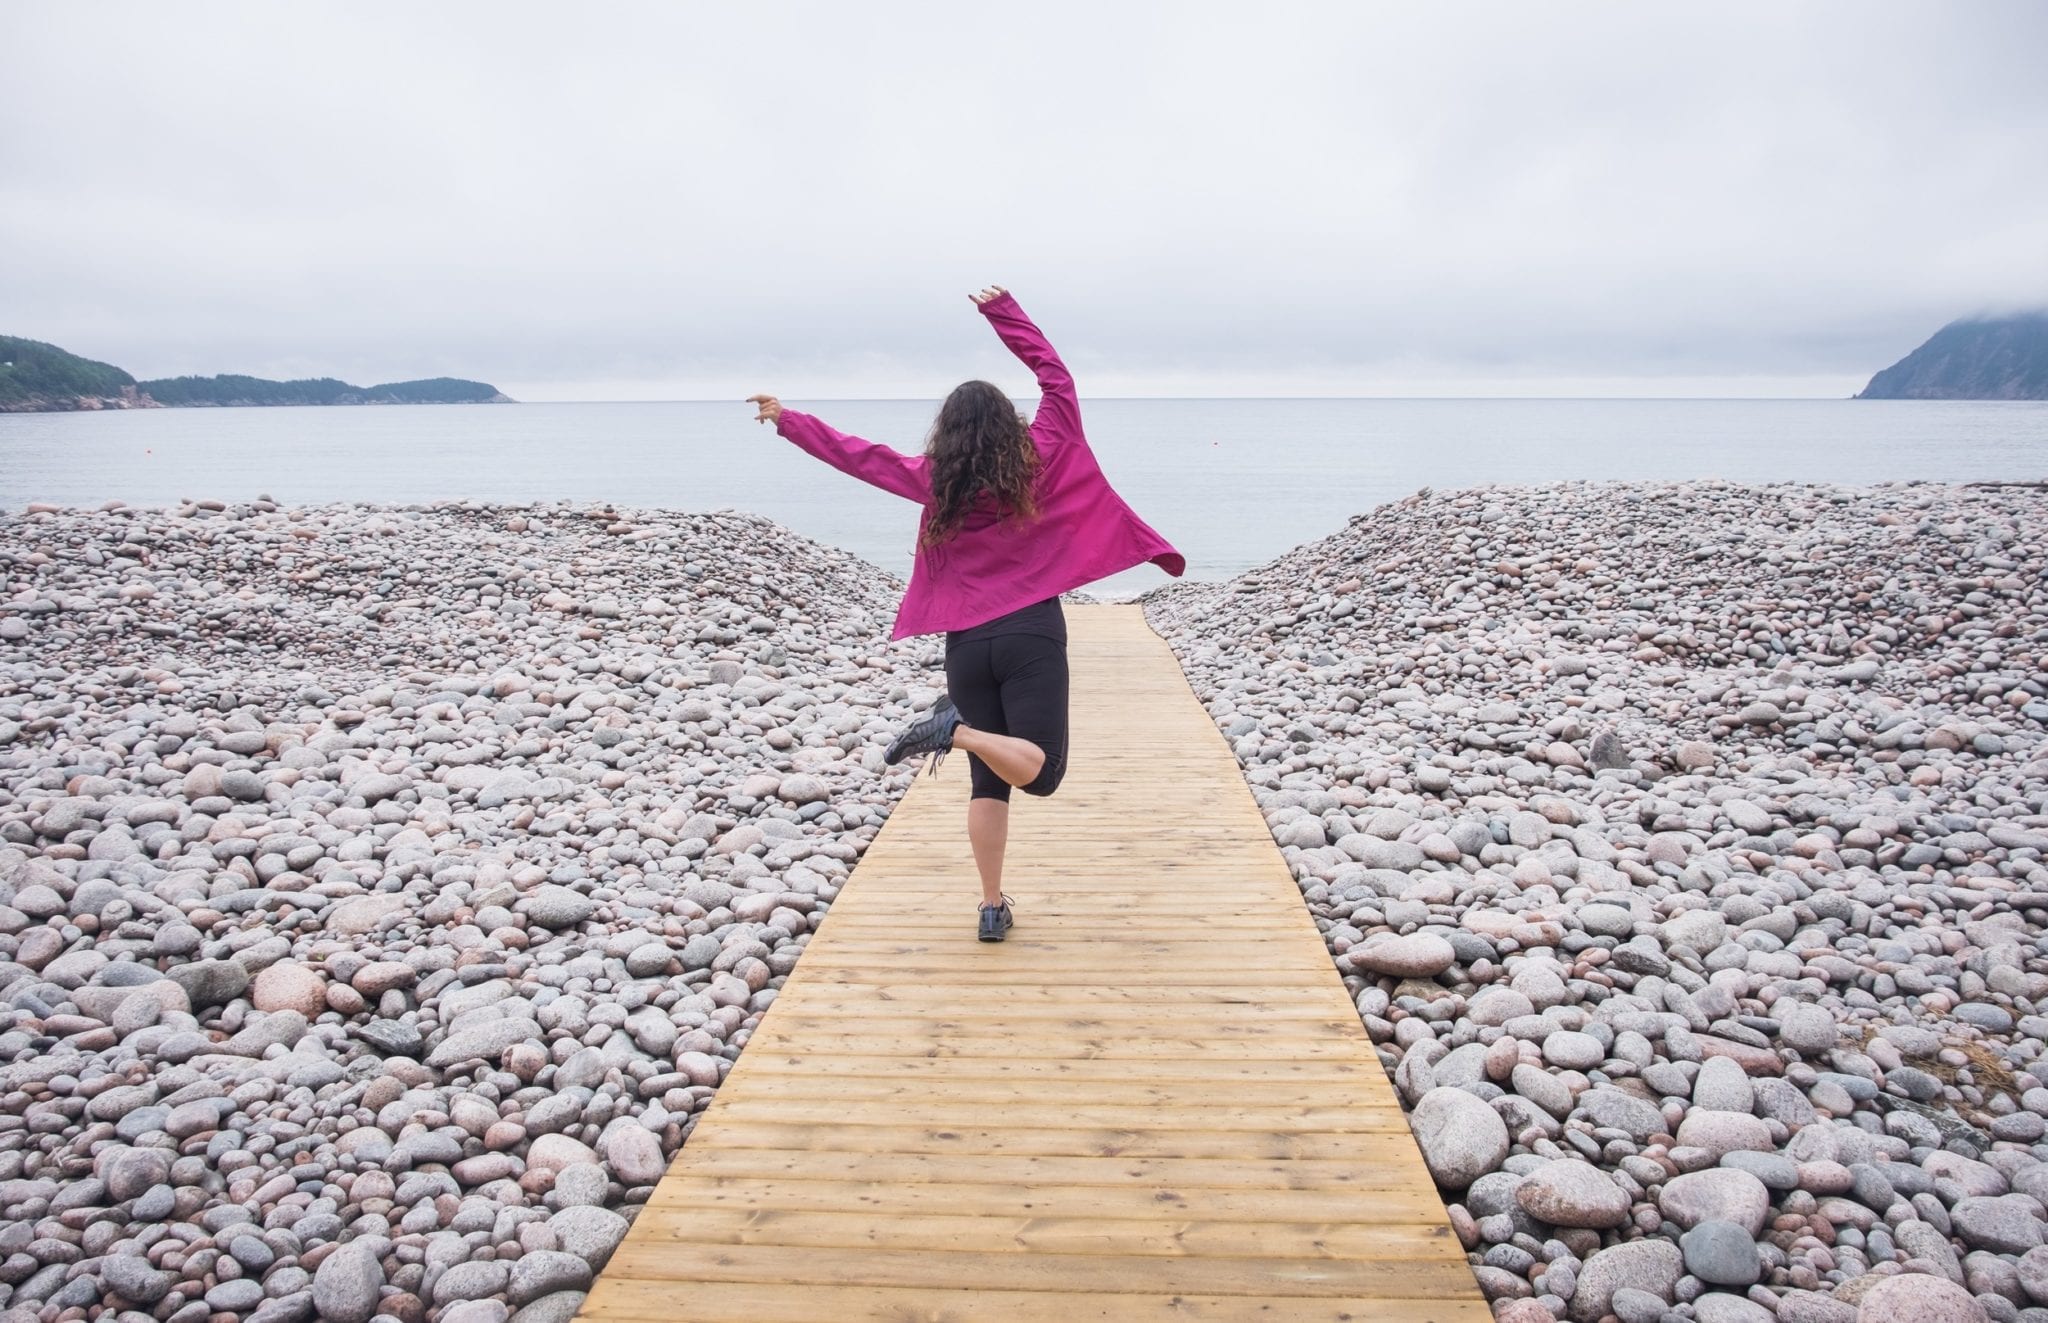 Kate wears a hot pink coat and dances on a platform at Ingonish Beach, surrounded by rocks.